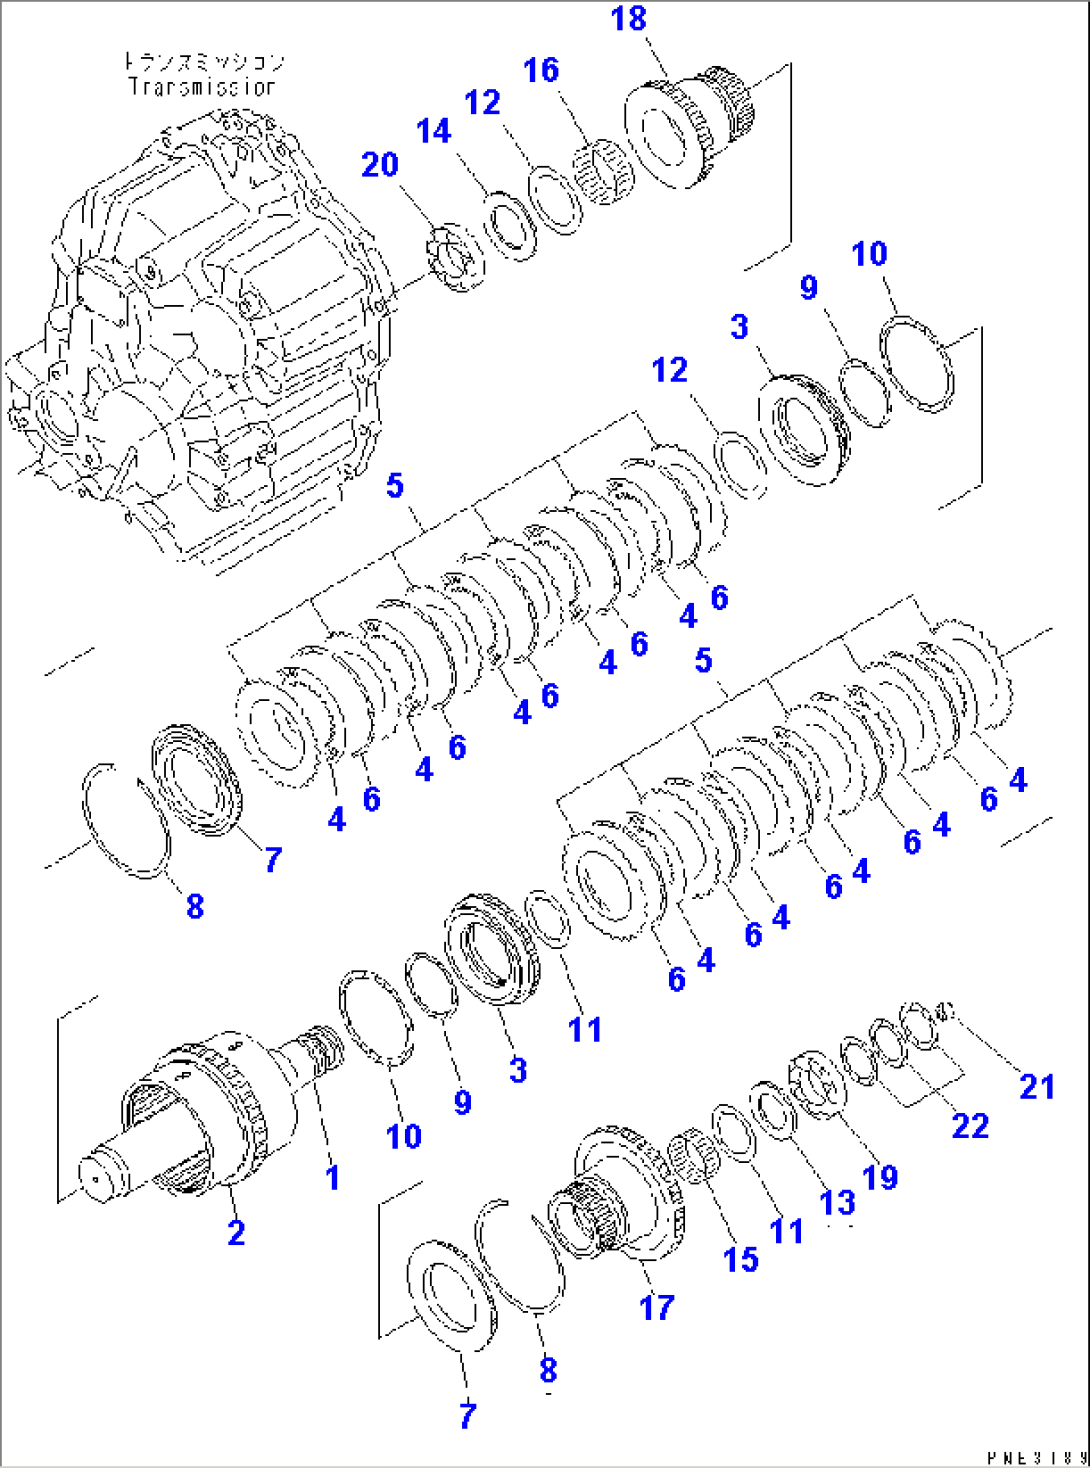 TRANSMISSION (3RD AND 4TH CLUTCH) (FOR 4-SPEED)